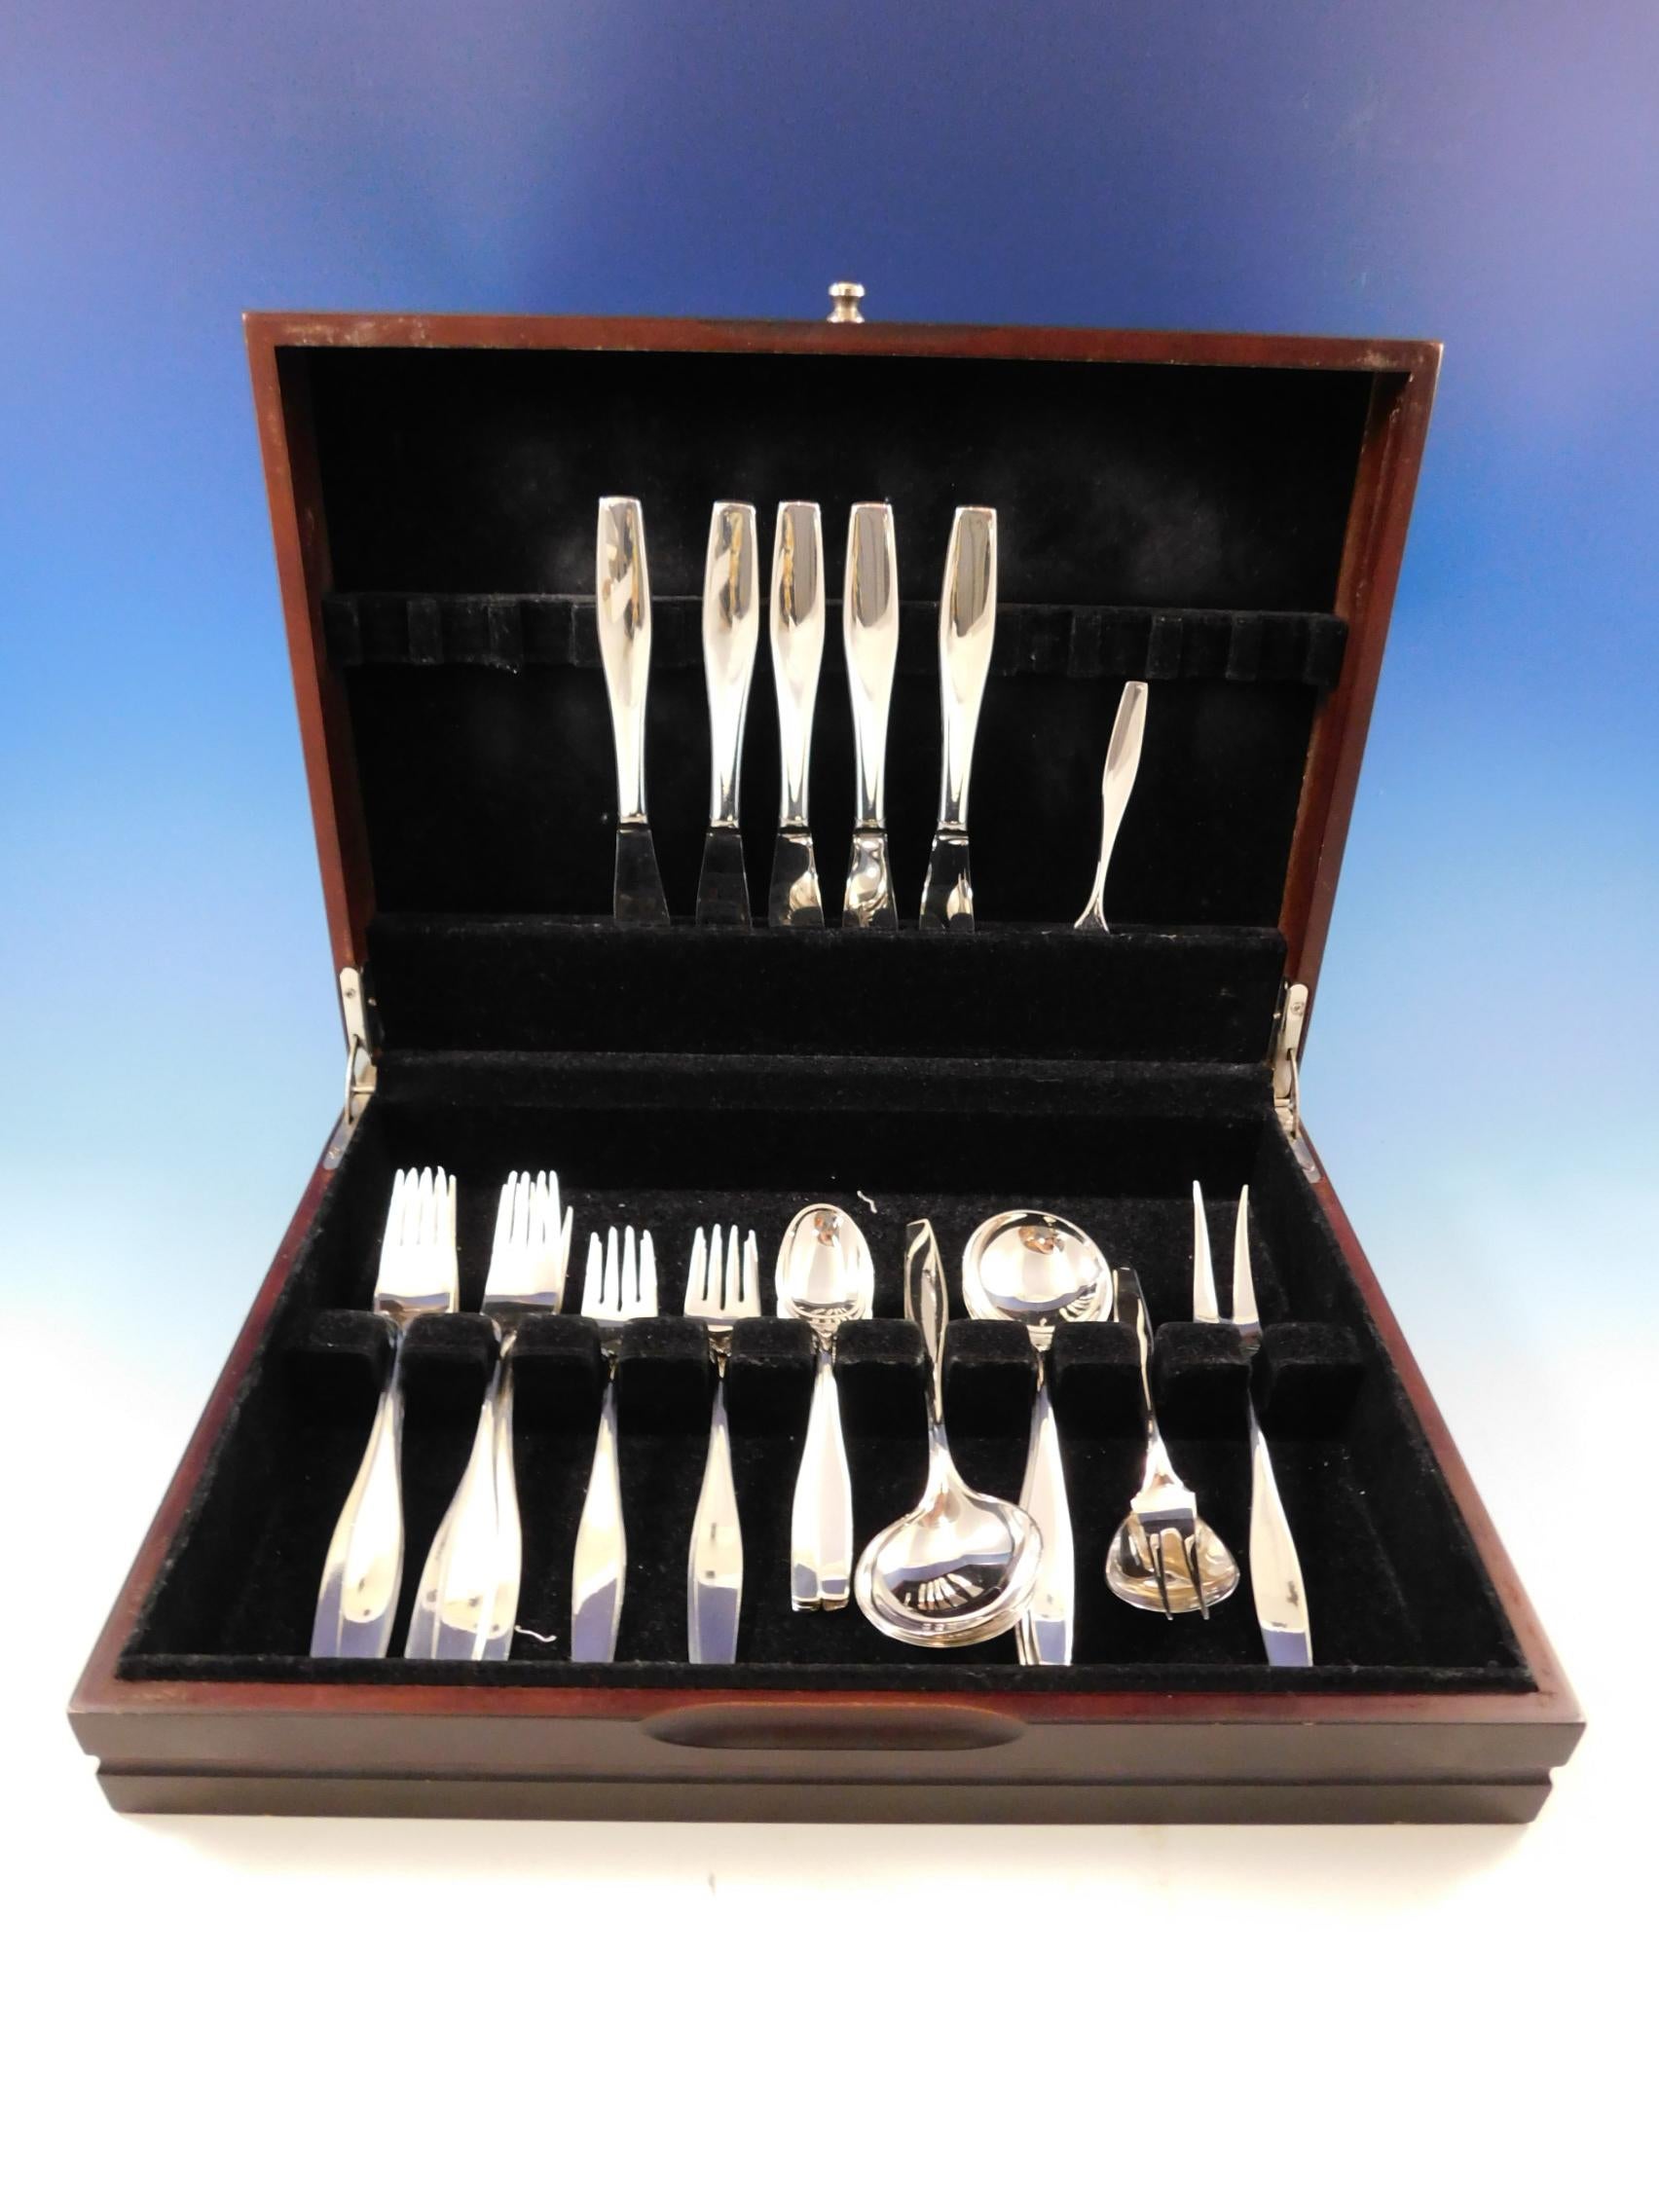 Charlotte by Hans Hansen Danish Mid-Century Modern sterling silver flatware set - 31 pieces. This set includes: 

Five knives, 8 1/2